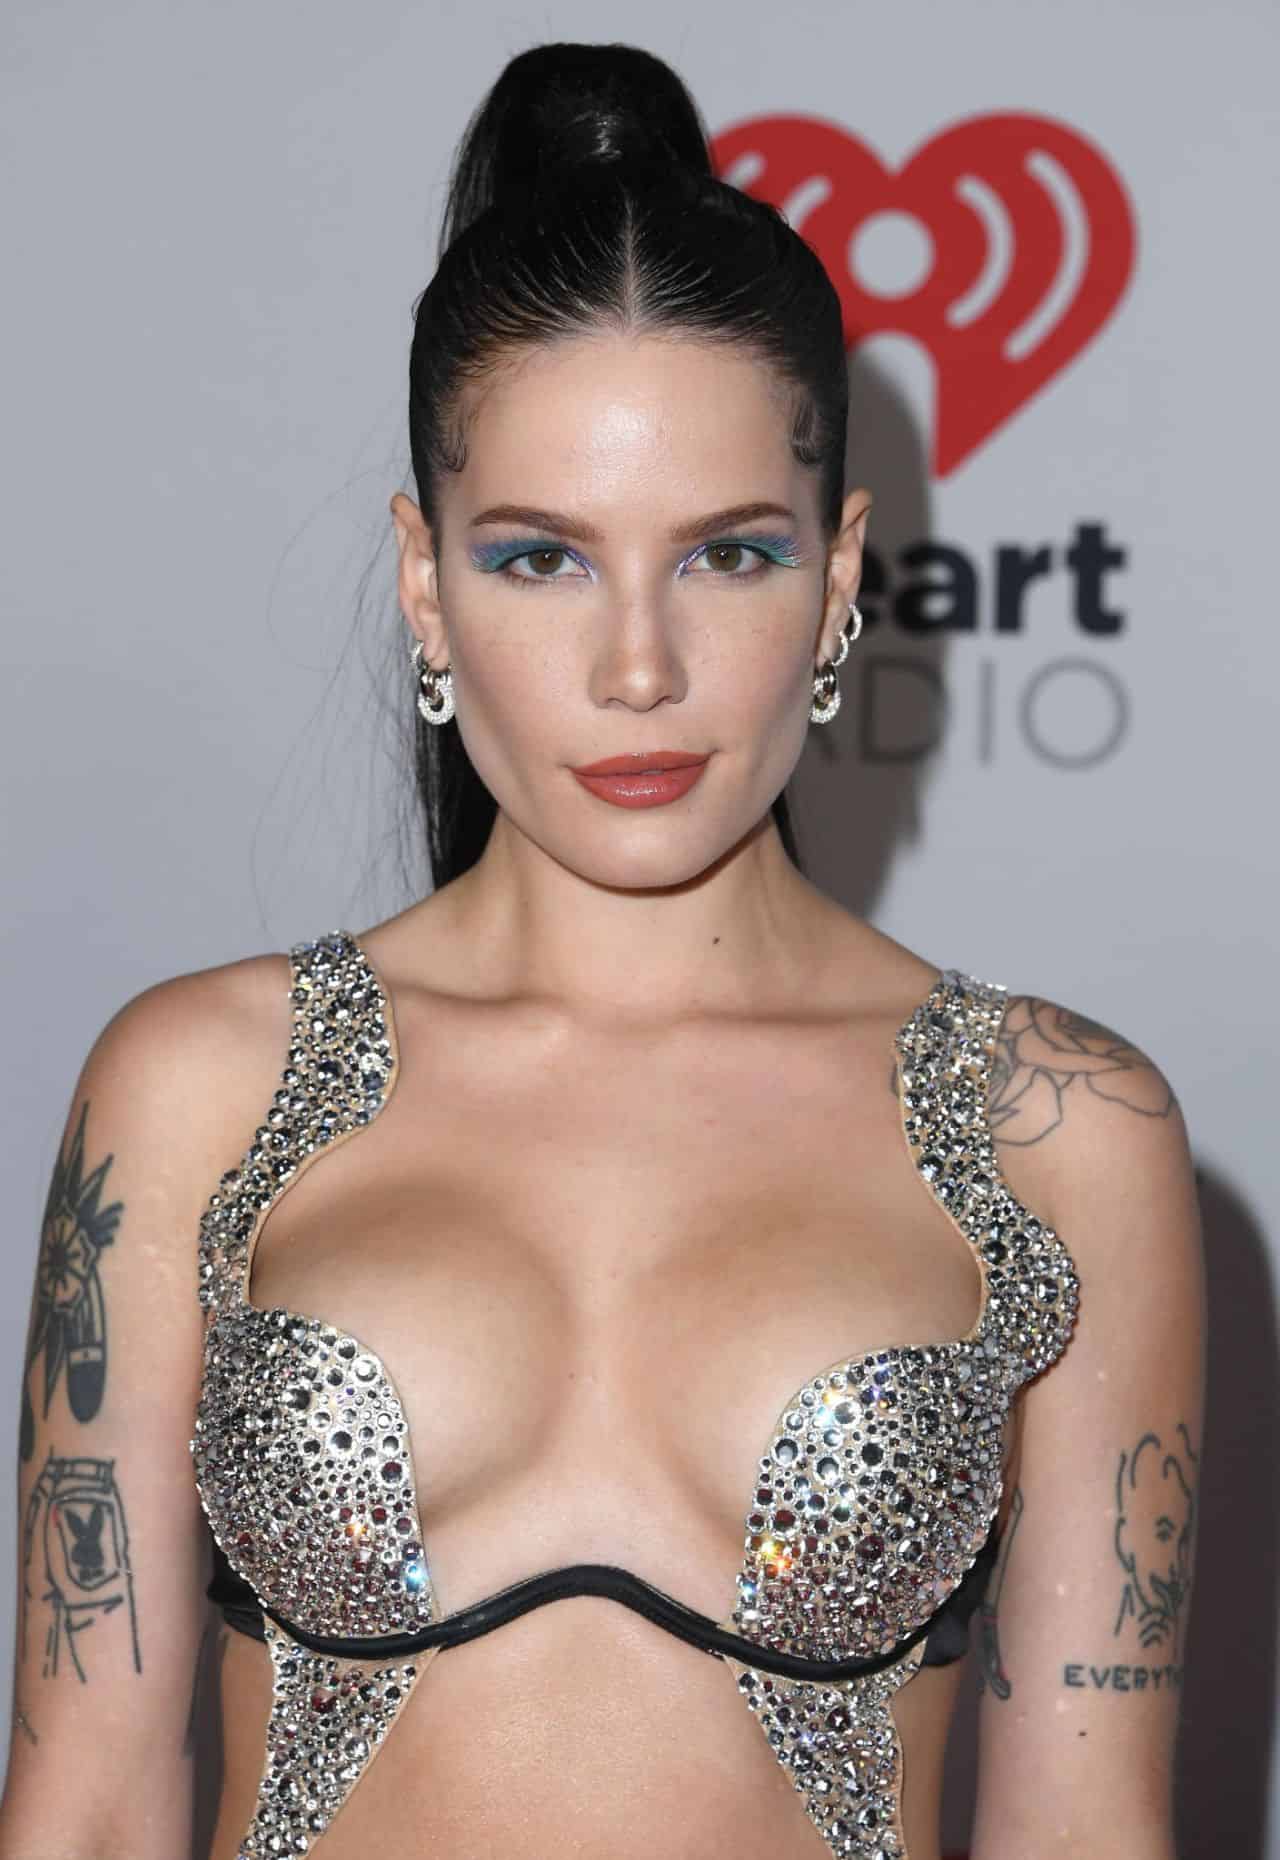 Halsey Dressed to Impress at the 2022 iHeartRadio Music Awards in LA